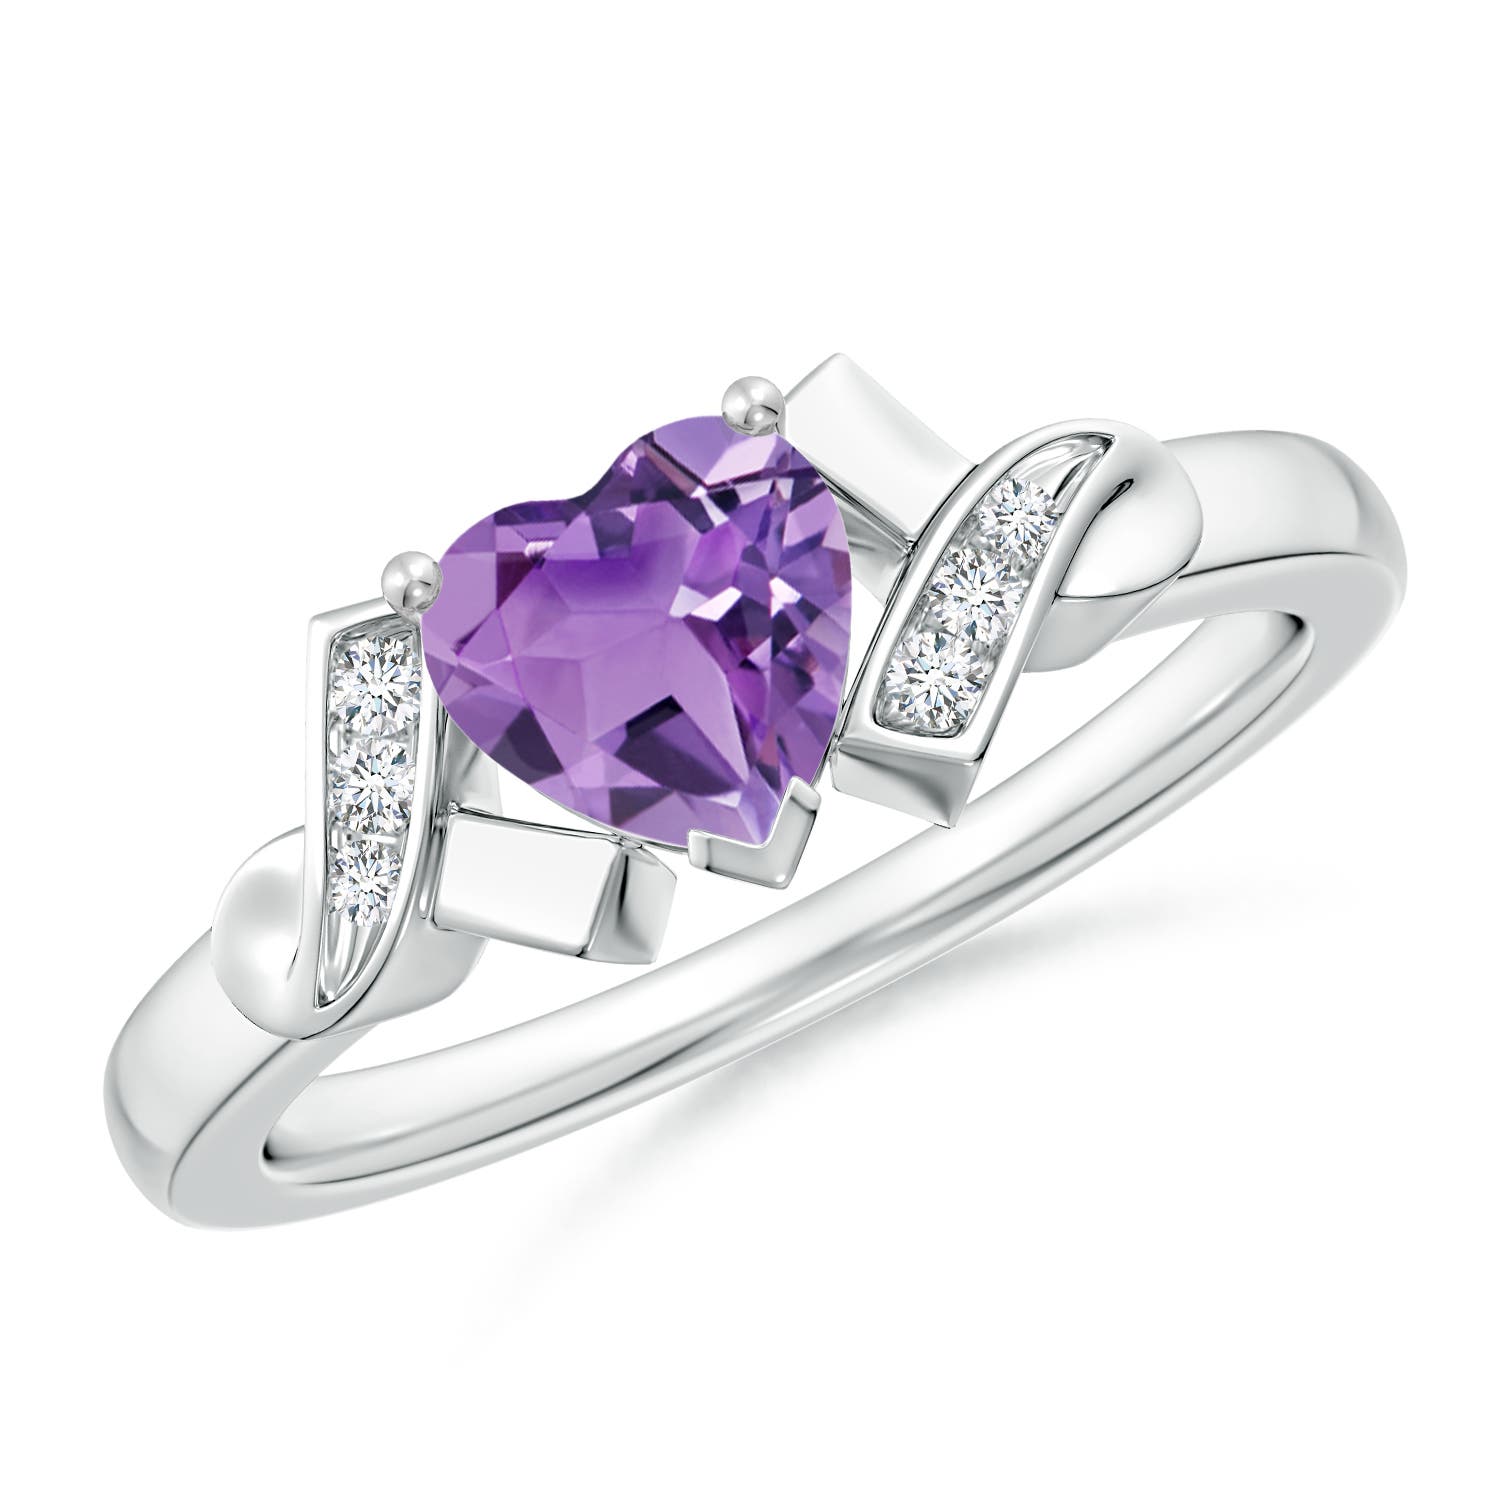 A - Amethyst / 0.76 CT / 14 KT White Gold